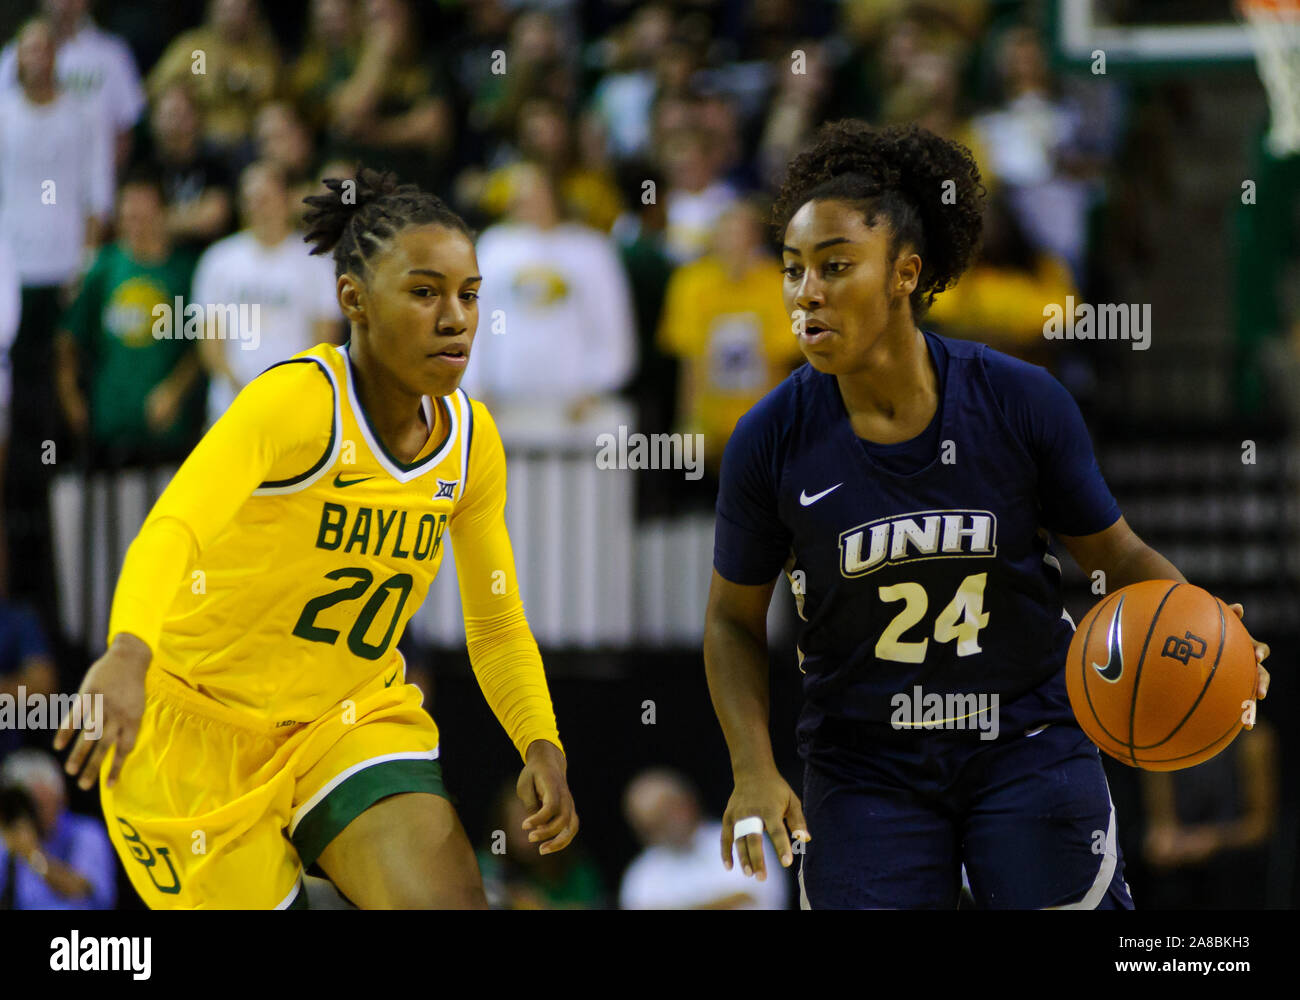 Waco, Texas, USA. 5th Nov, 2019. Baylor Lady Bears guard Juicy Landrum (20) defends New Hampshire Wildcats guard Helena Delaruelle (24) during the 1st half of the NCAA Women's Basketball game between New Hampshire Wildcats and the Baylor Bears at The Ferrell Center in Waco, Texas. Matthew Lynch/CSM/Alamy Live News Stock Photo